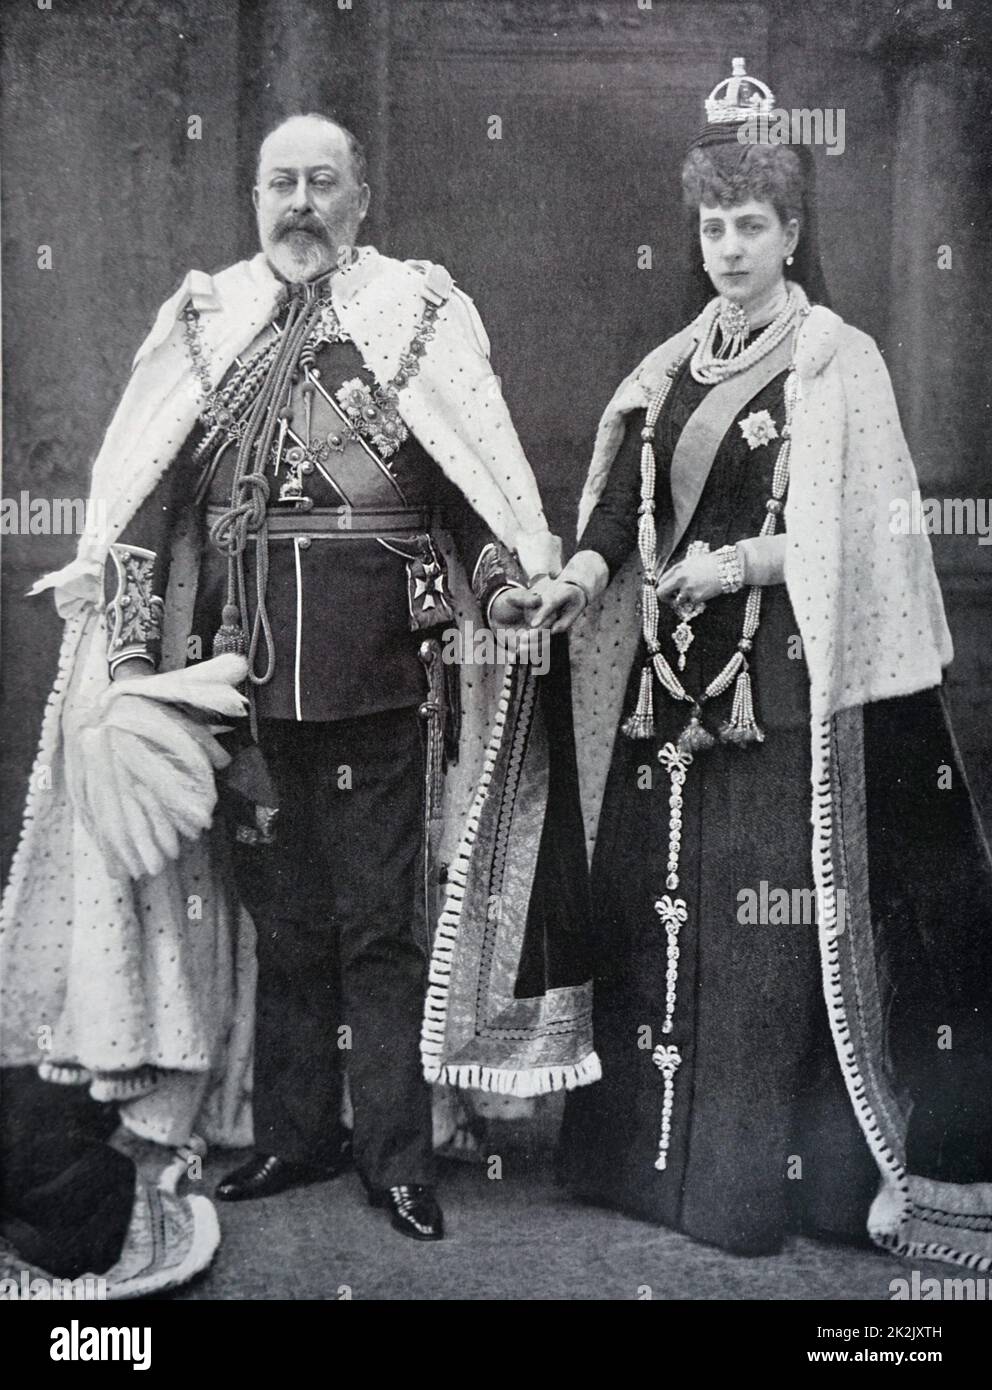 Photograph of King Edward VII (1841-1910) and Queen Alexandra of Denmark (1844-1925) wearing the robes in which they would open parliament. Dated 19th Century Stock Photo